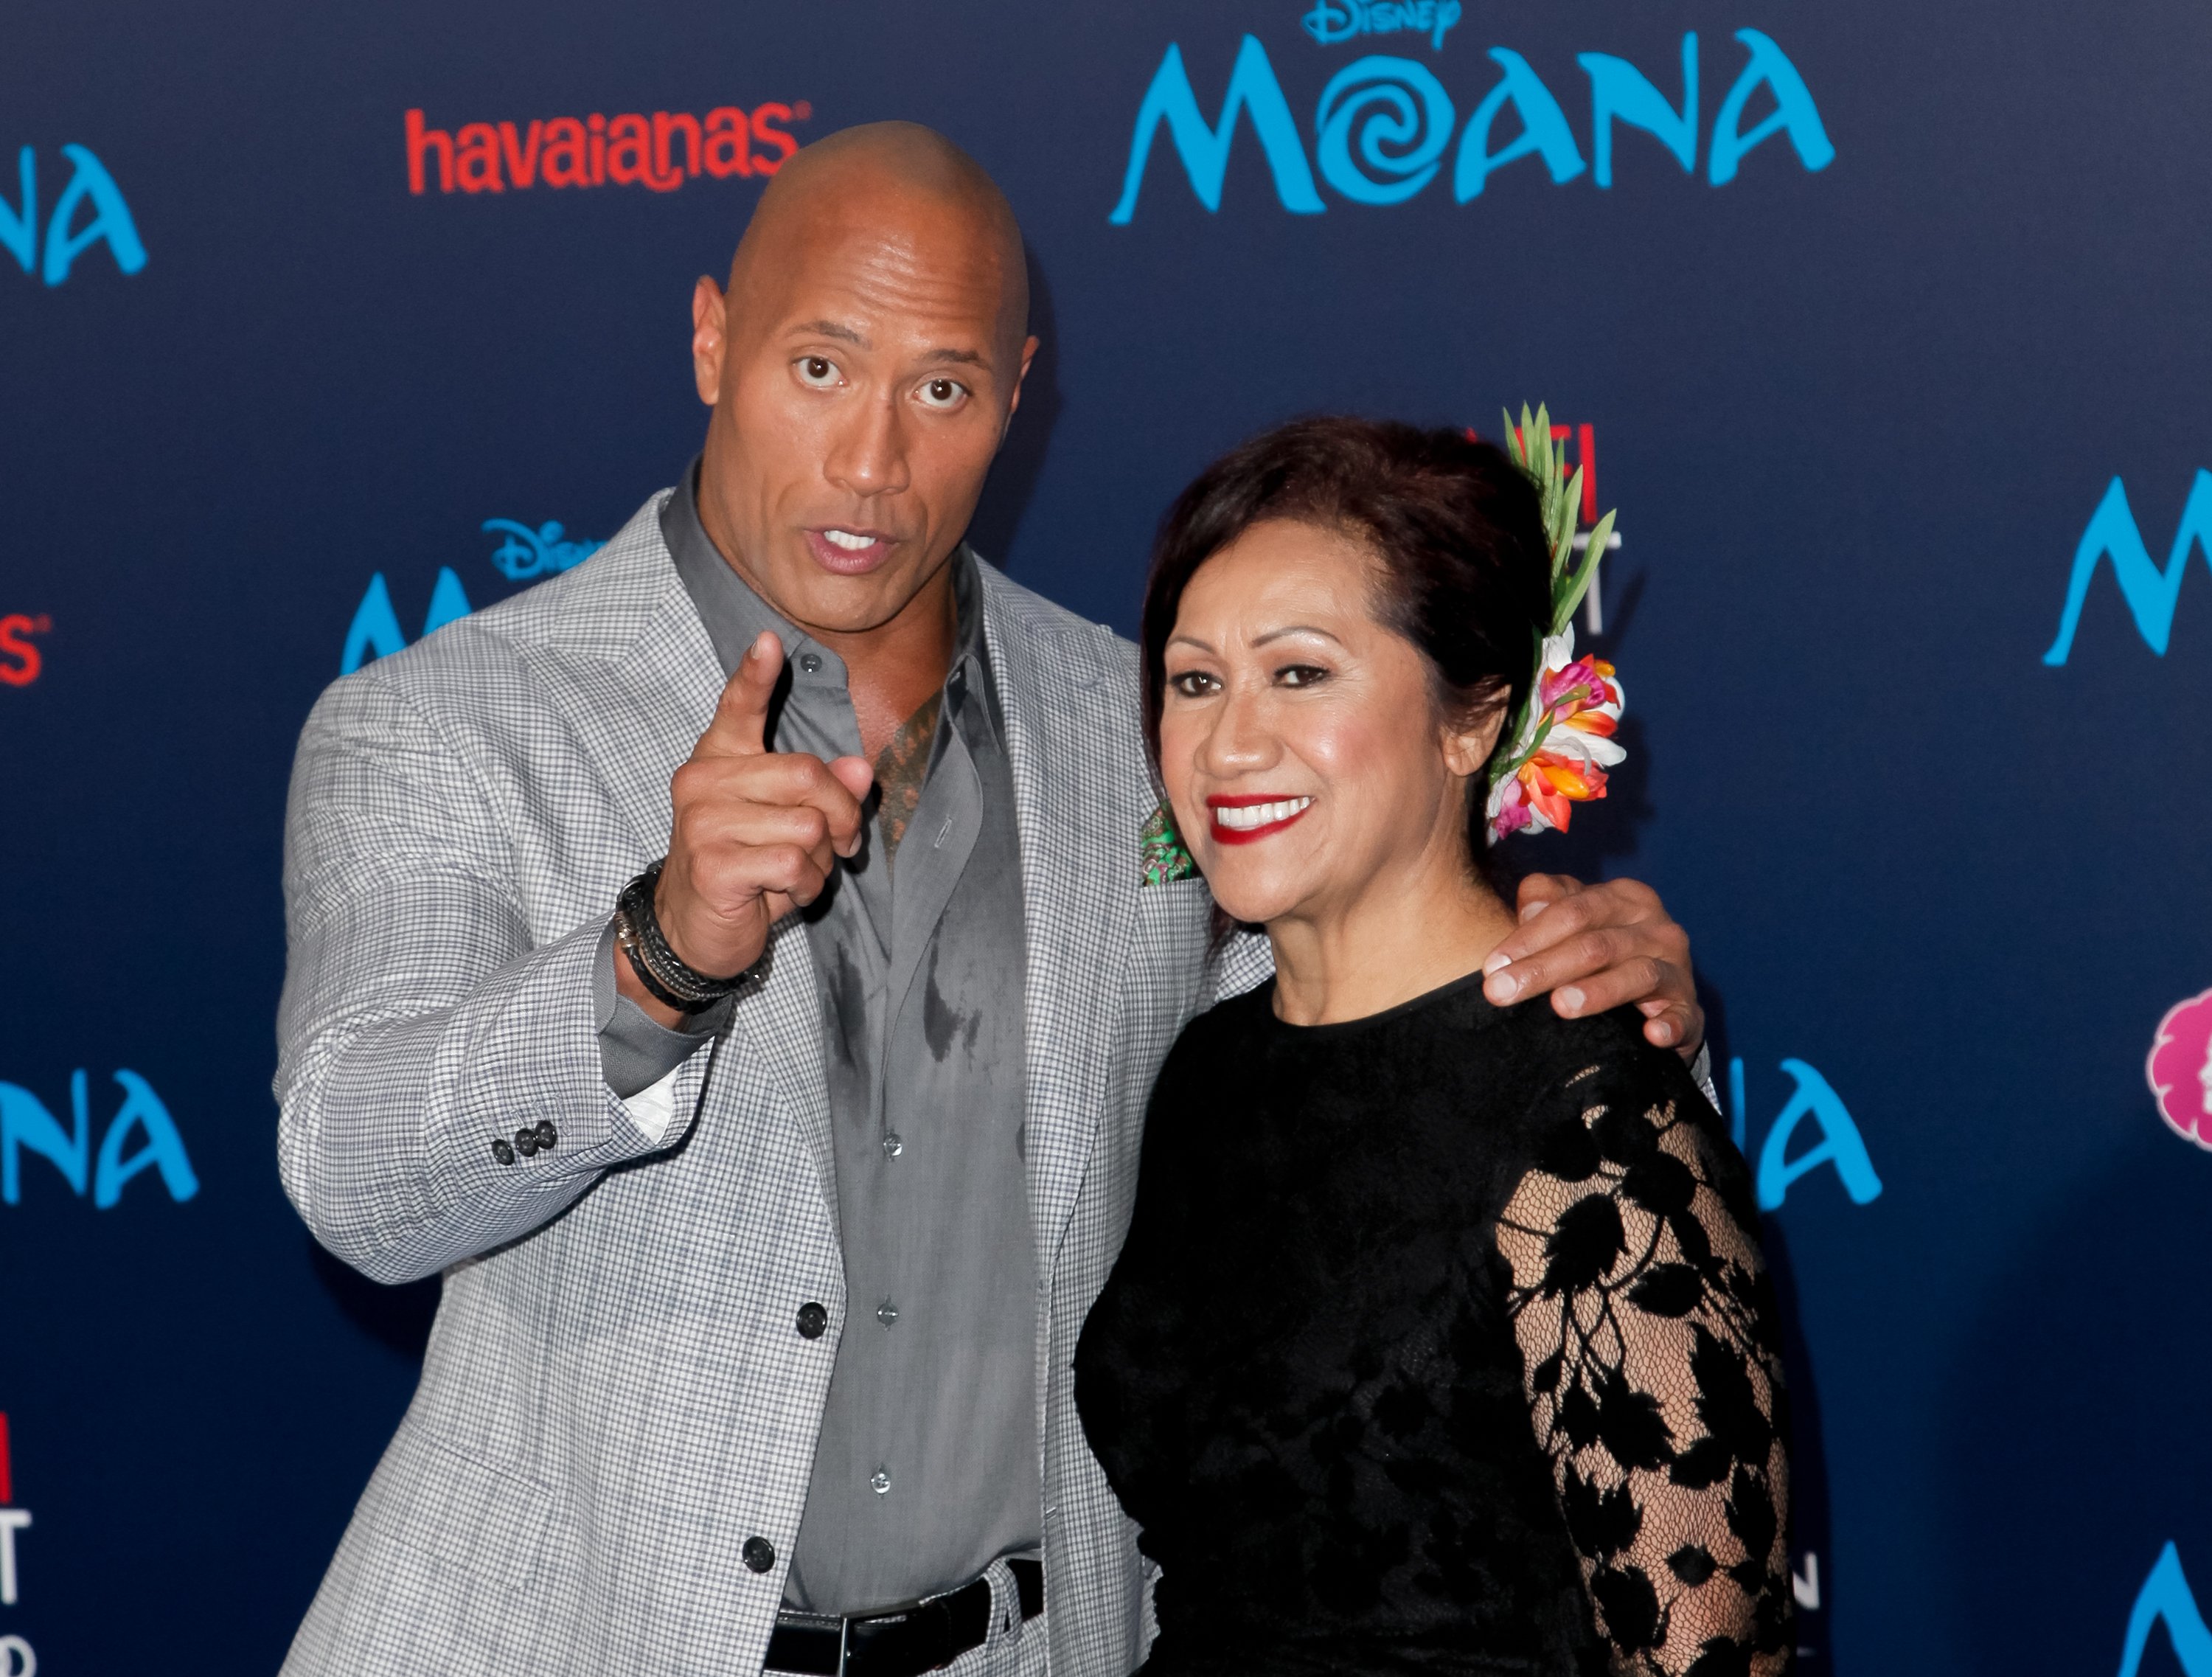 Actor Dwayne Johnson and his mother Ata Johnson at the El Capitan Theatre on November 14, 2016 in Hollywood, California. | Source: Getty Images